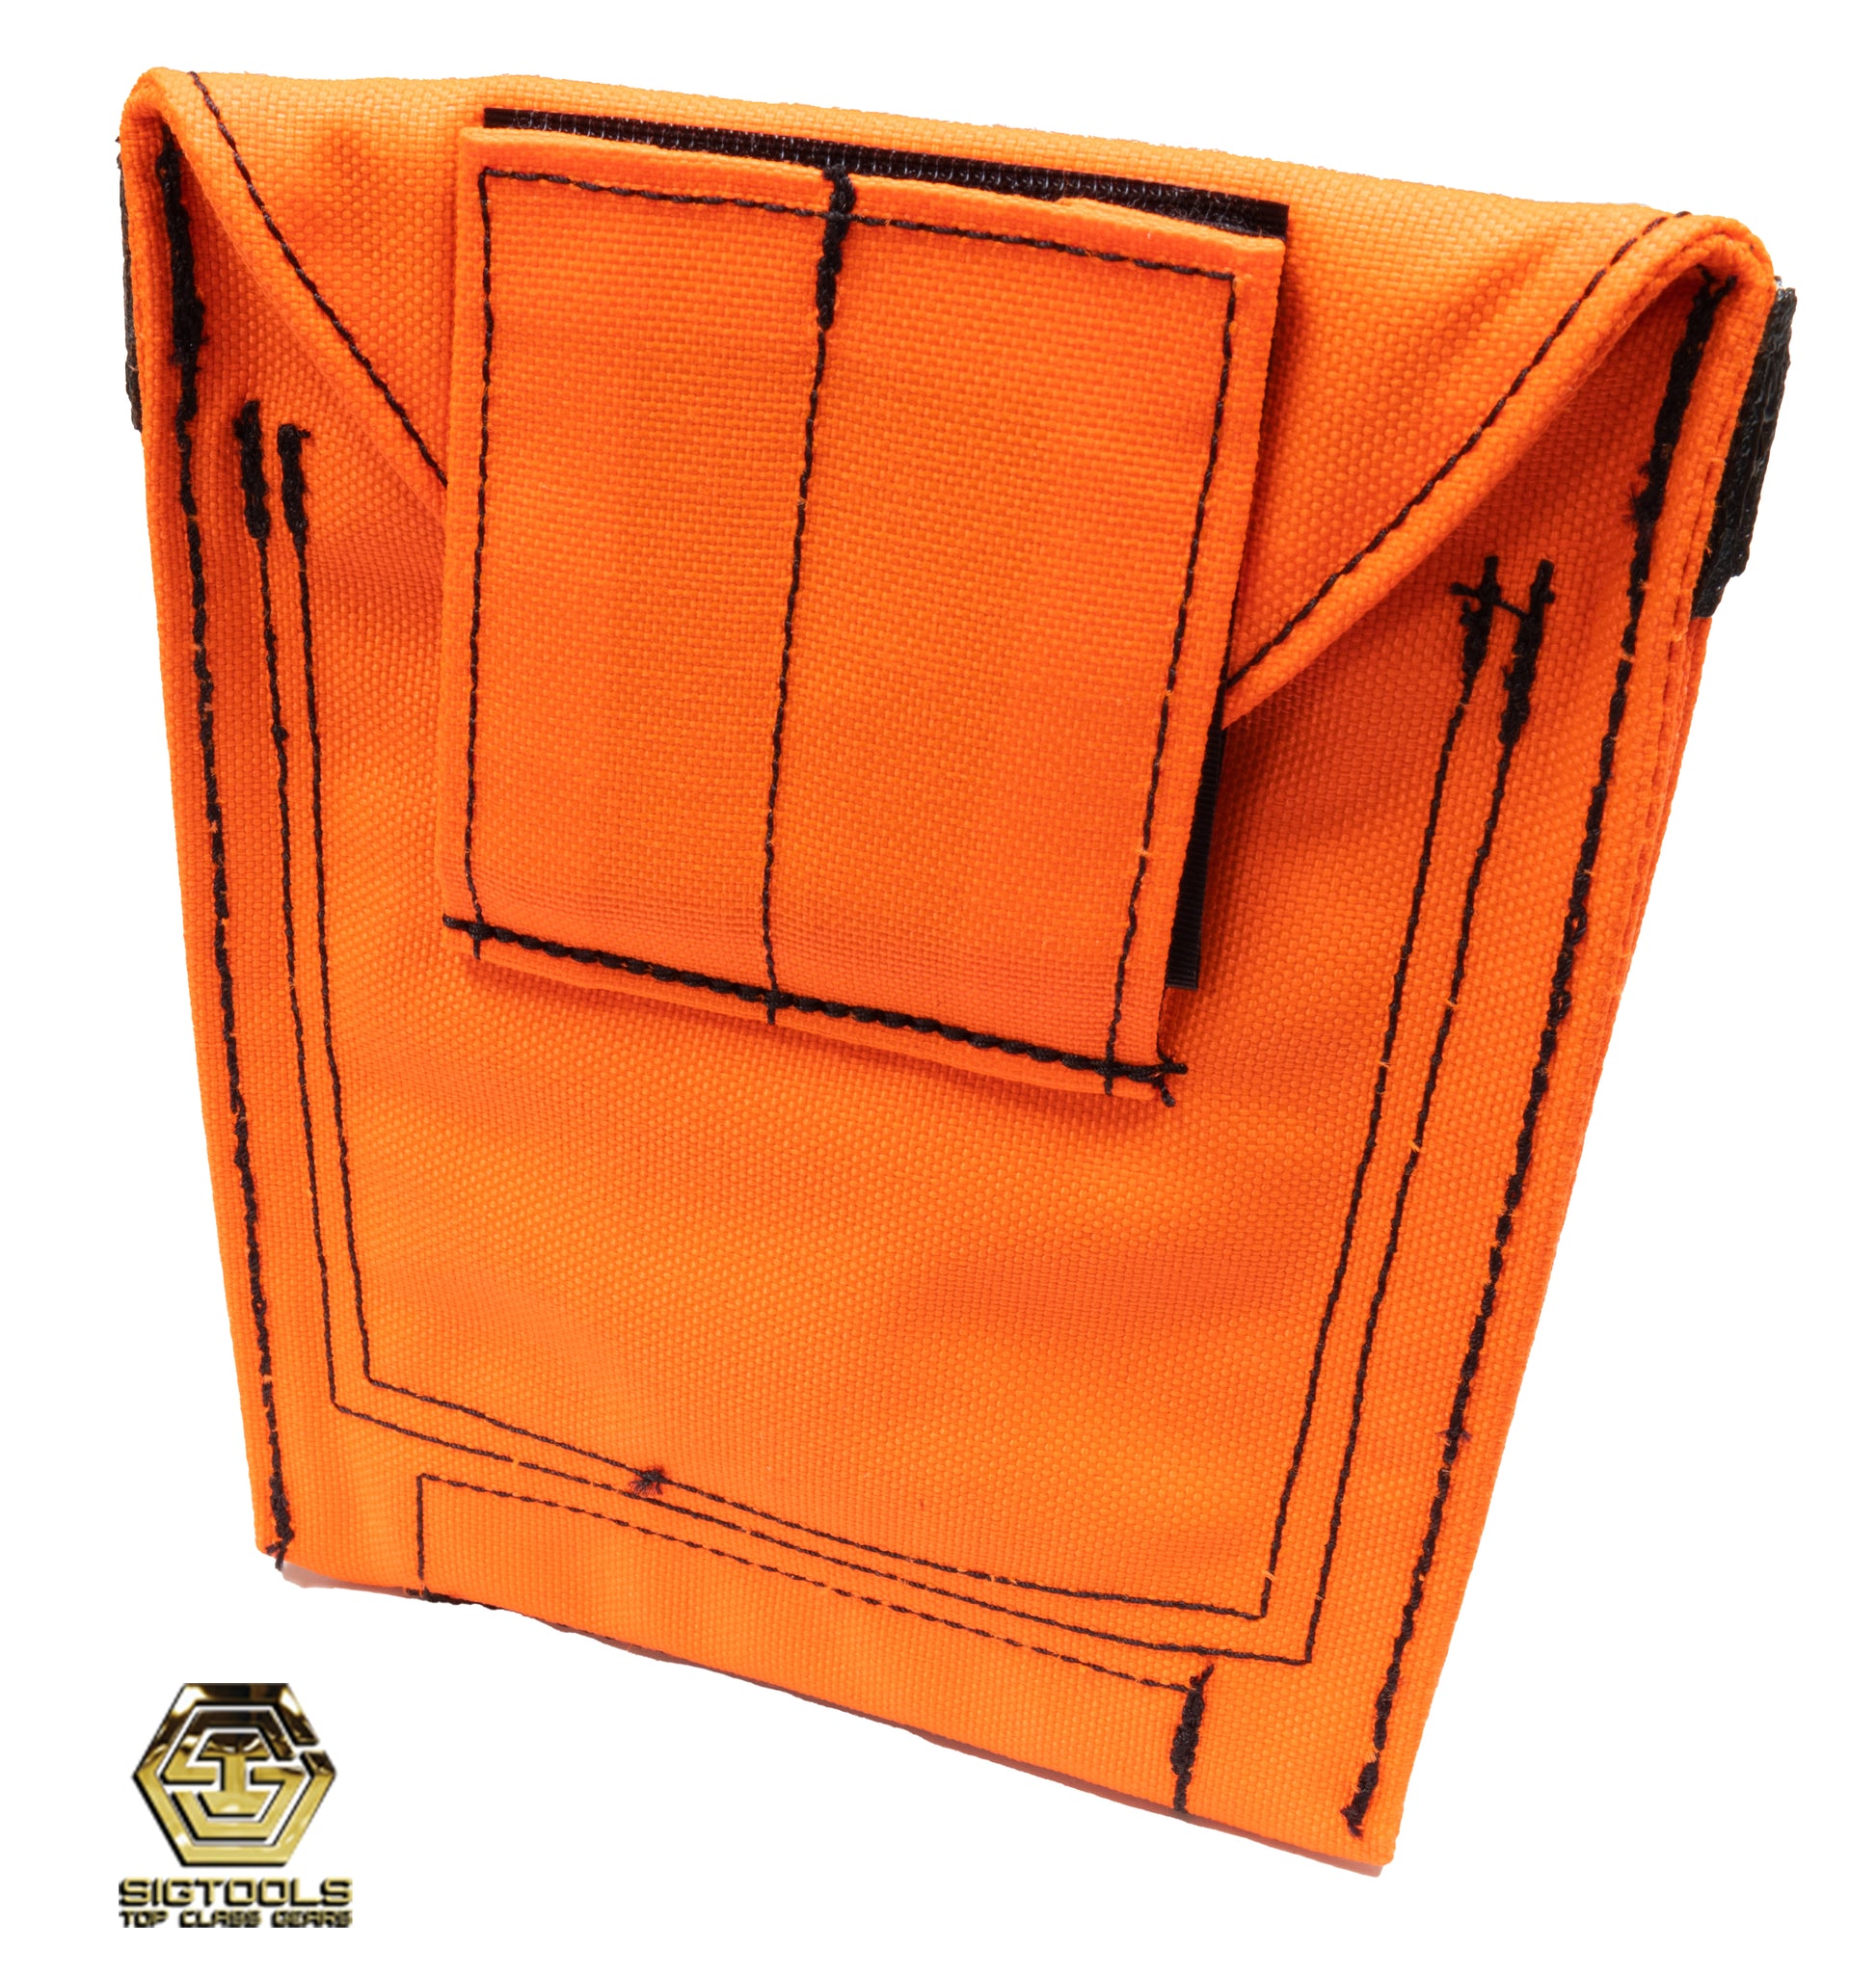 A rear view of the high-visibility Tool Pouch from Badger, a practical accessory designed for carrying and organizing tools.